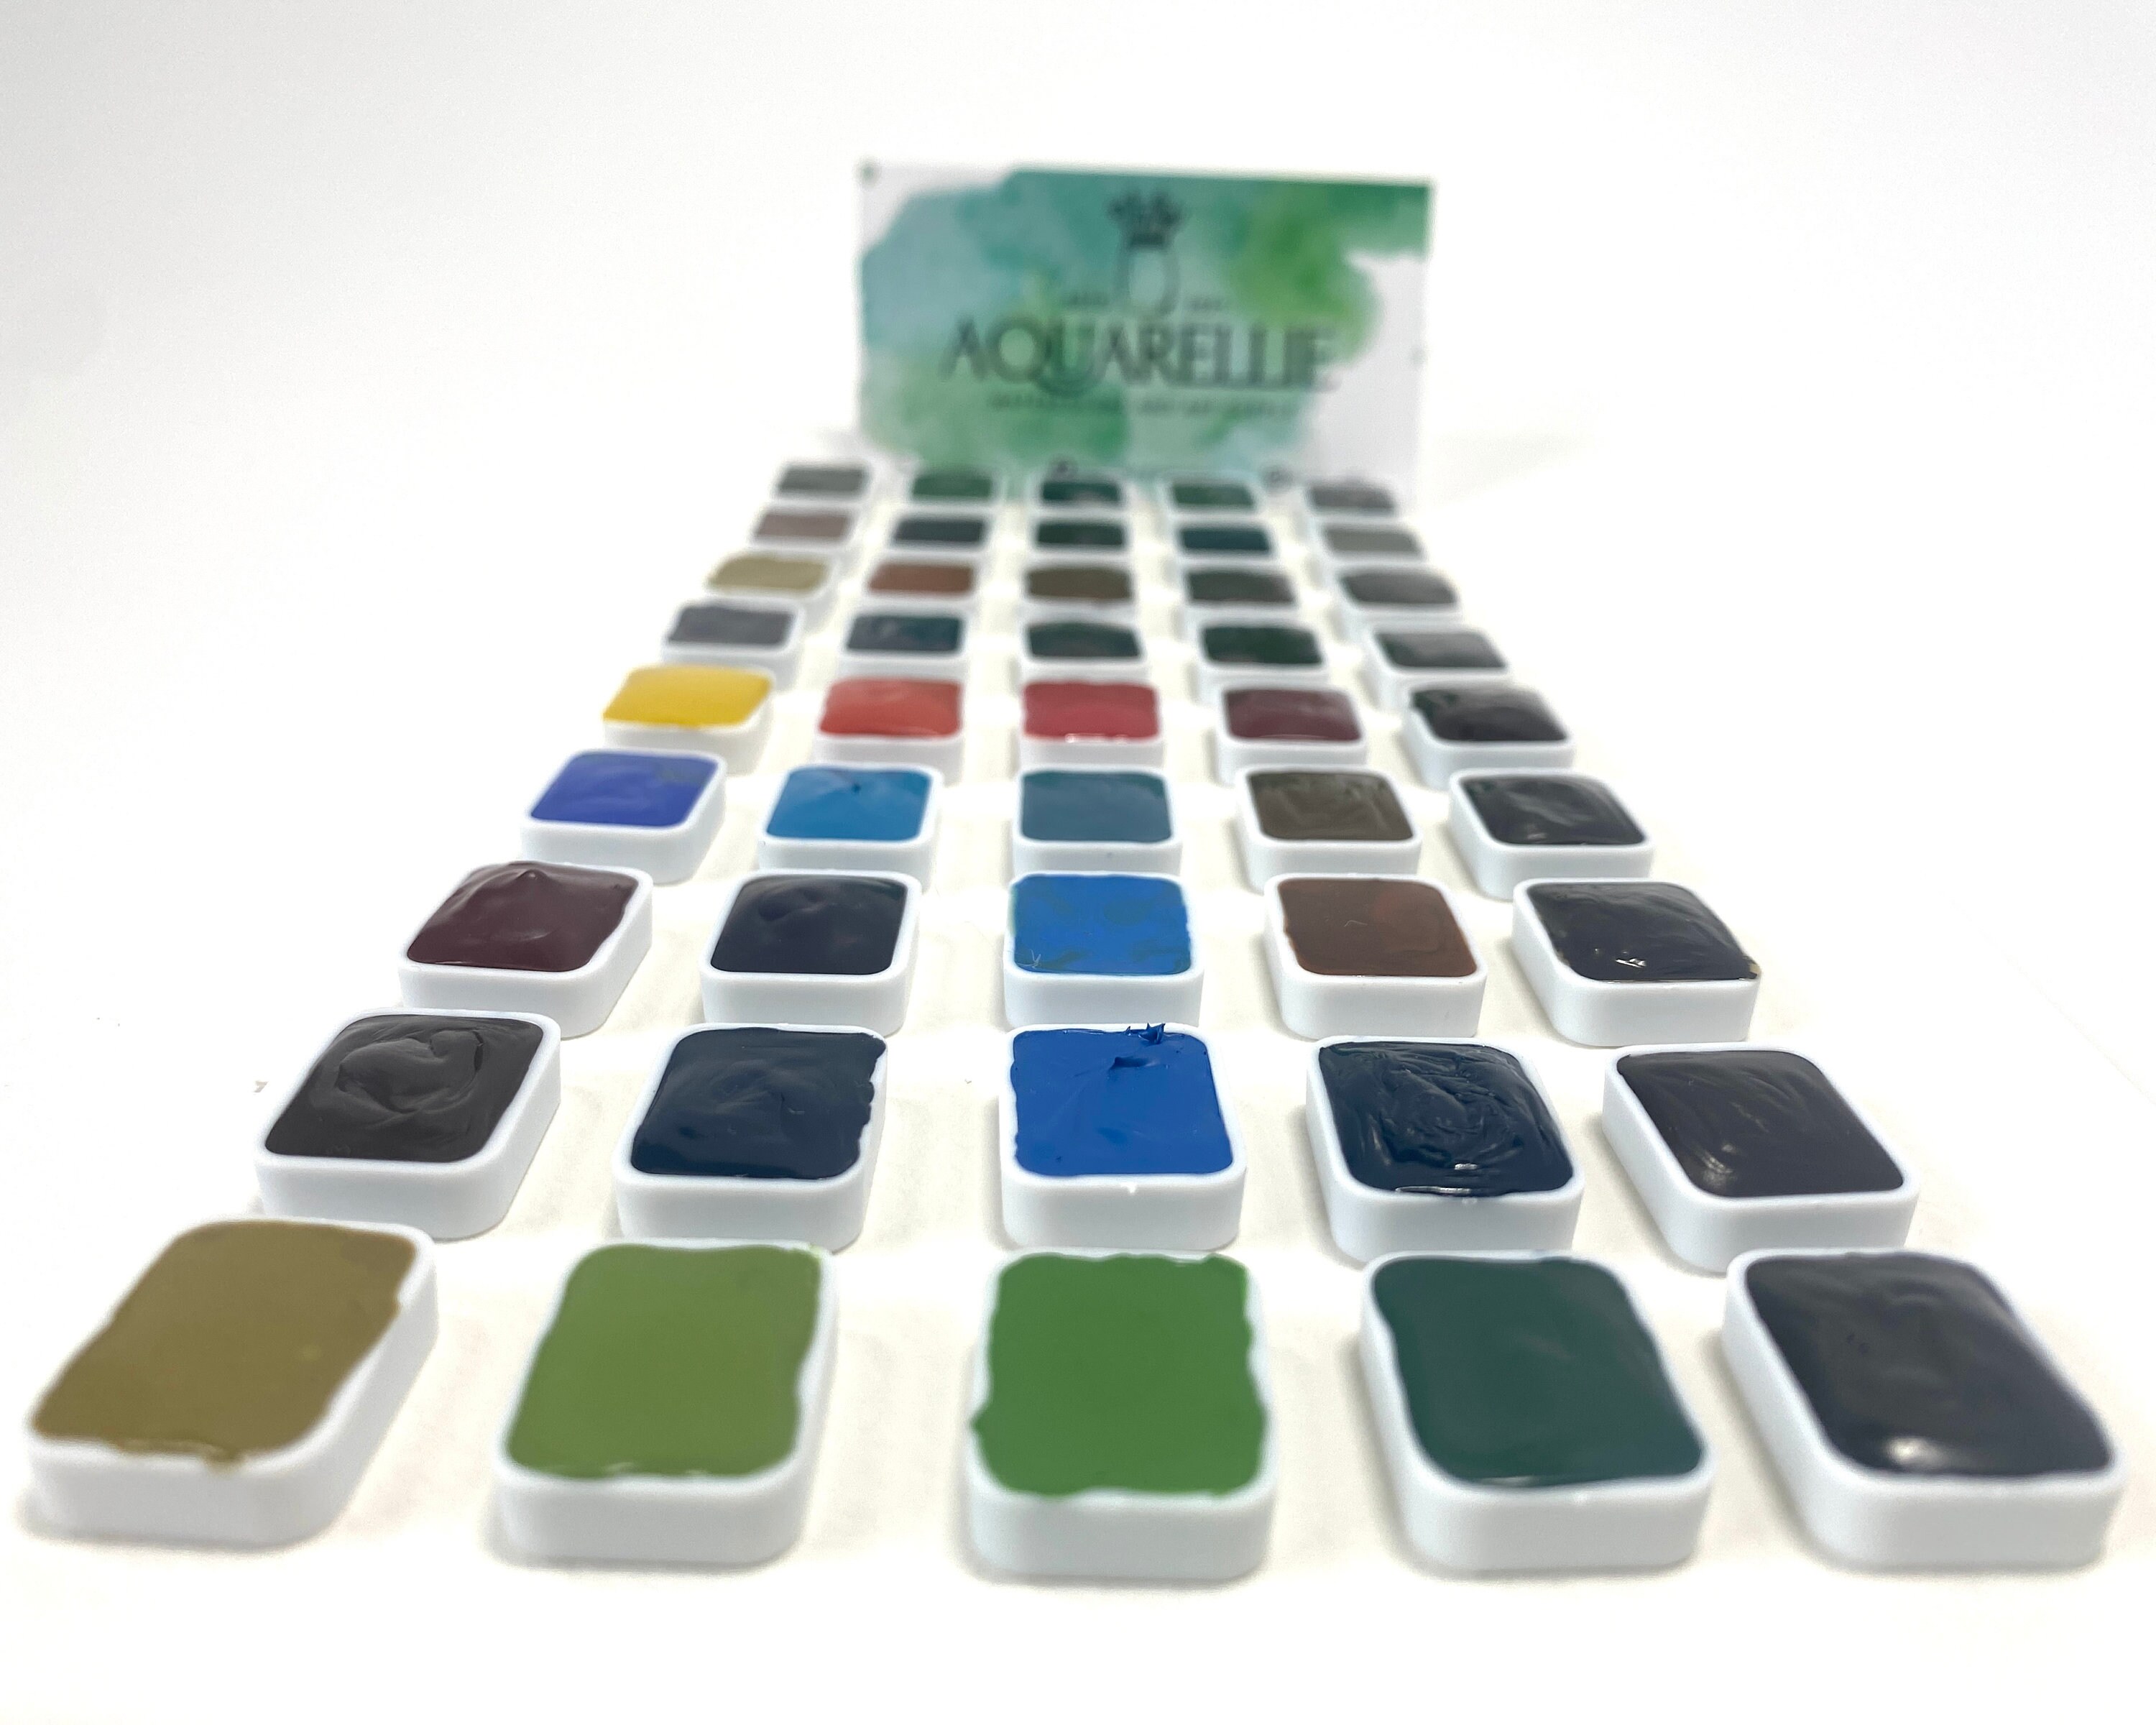 Complete Set of 50 Colors, Schmincke Limited Edition Super Granulating  Watercolor Paints, Artist Gift in Custom Magnetic Wood Box, 